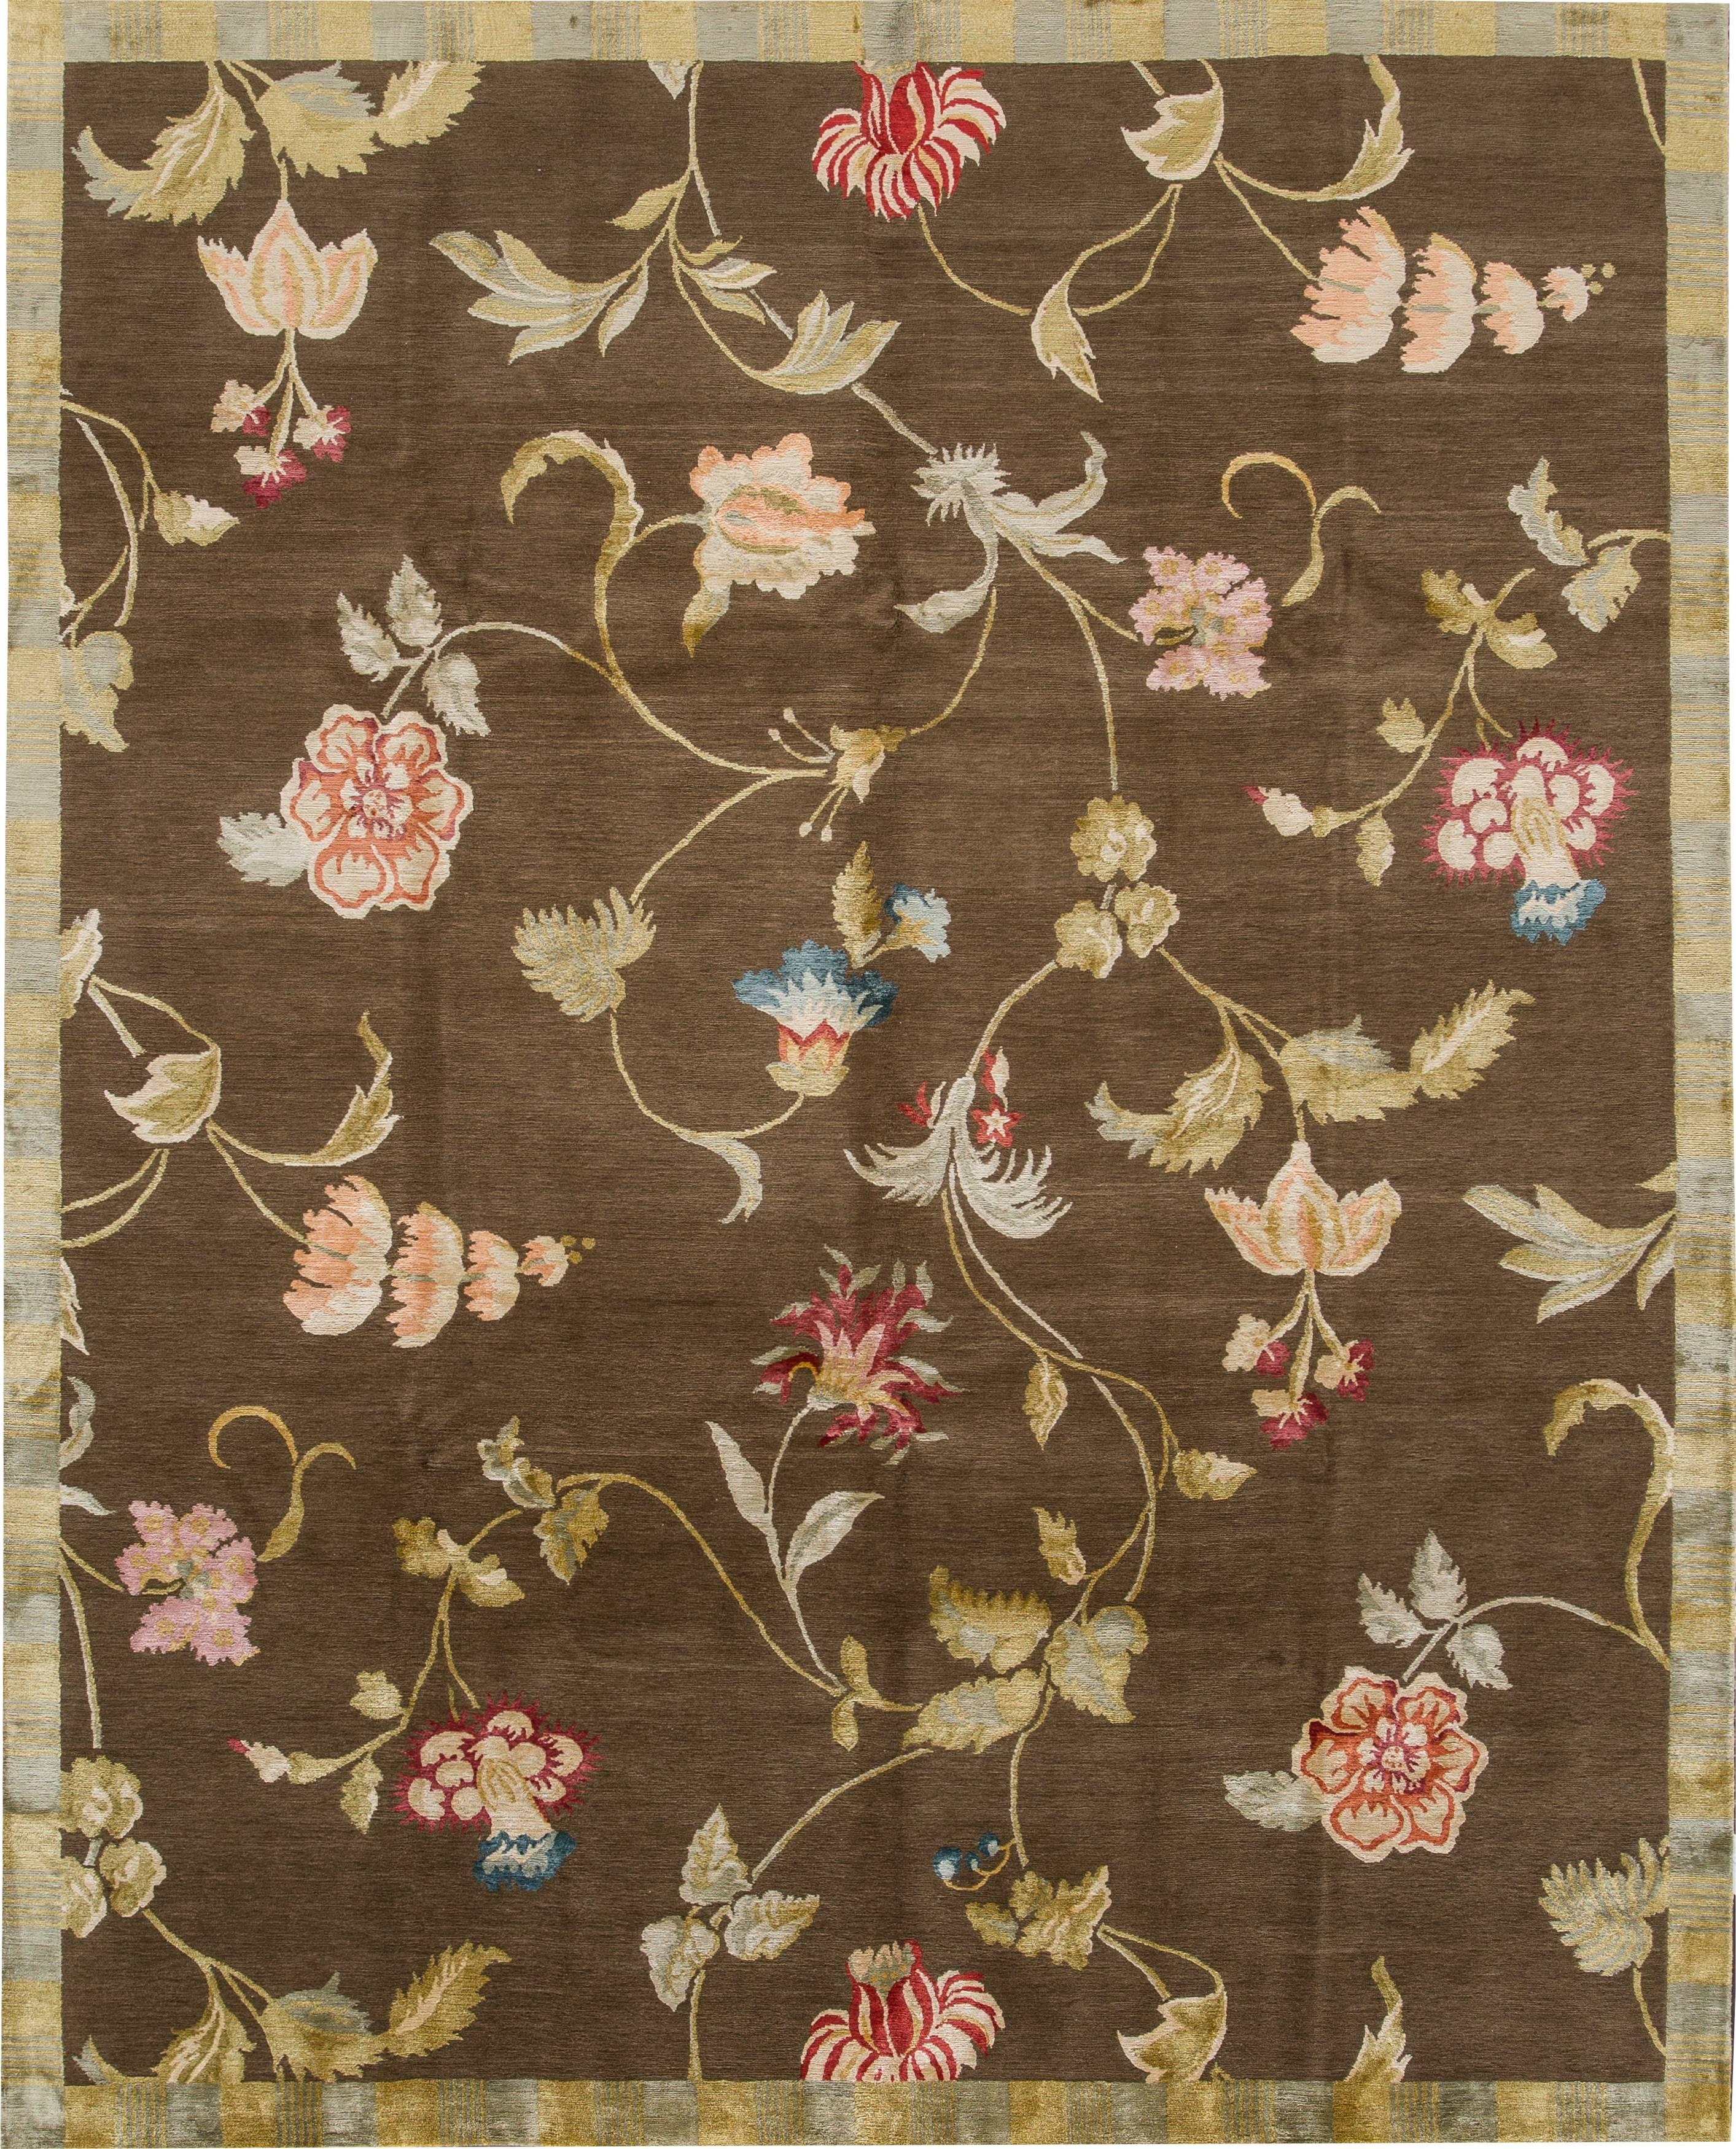 21st century contemporary (2000) Nepalese Lapchi rug, blend of wool and silk. Has a dark brown field and multicolored floral design. Measures 8x10.
